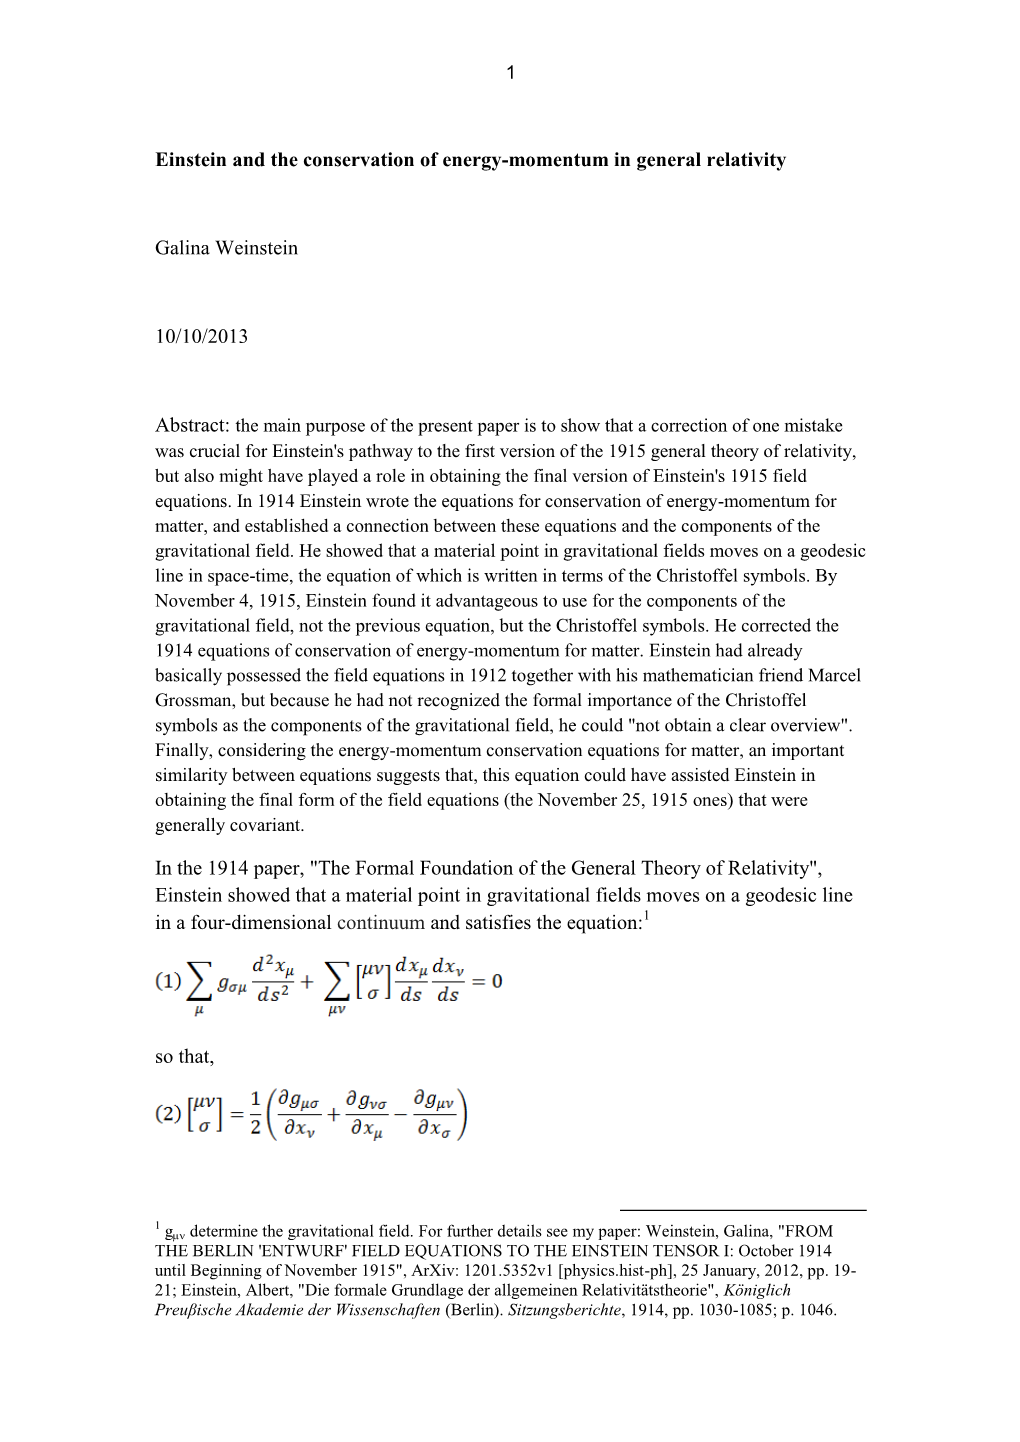 Einstein and the Conservation of Energy-Momentum in General Relativity